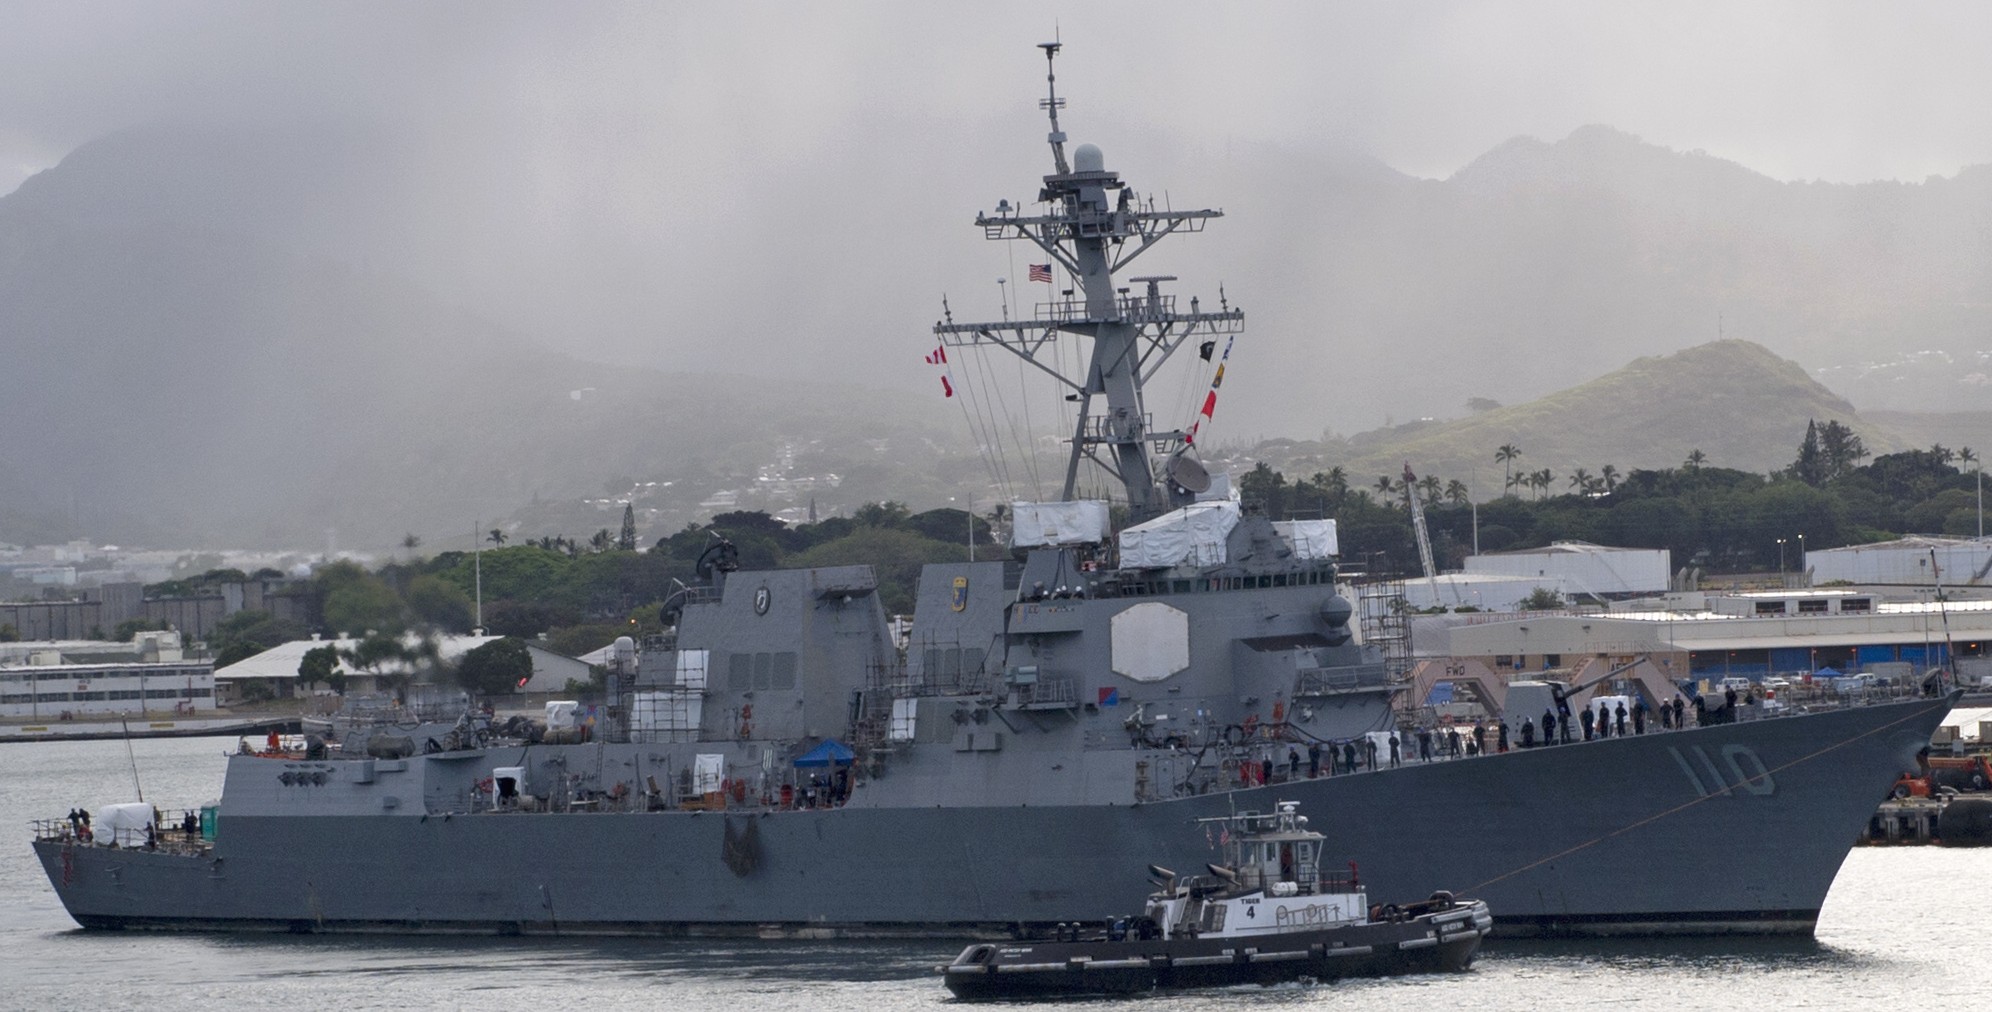 ddg-110 uss william p. lawrence arleigh burke class guided missile destroyer aegis us navy pearl harbor hickam hawaii 35